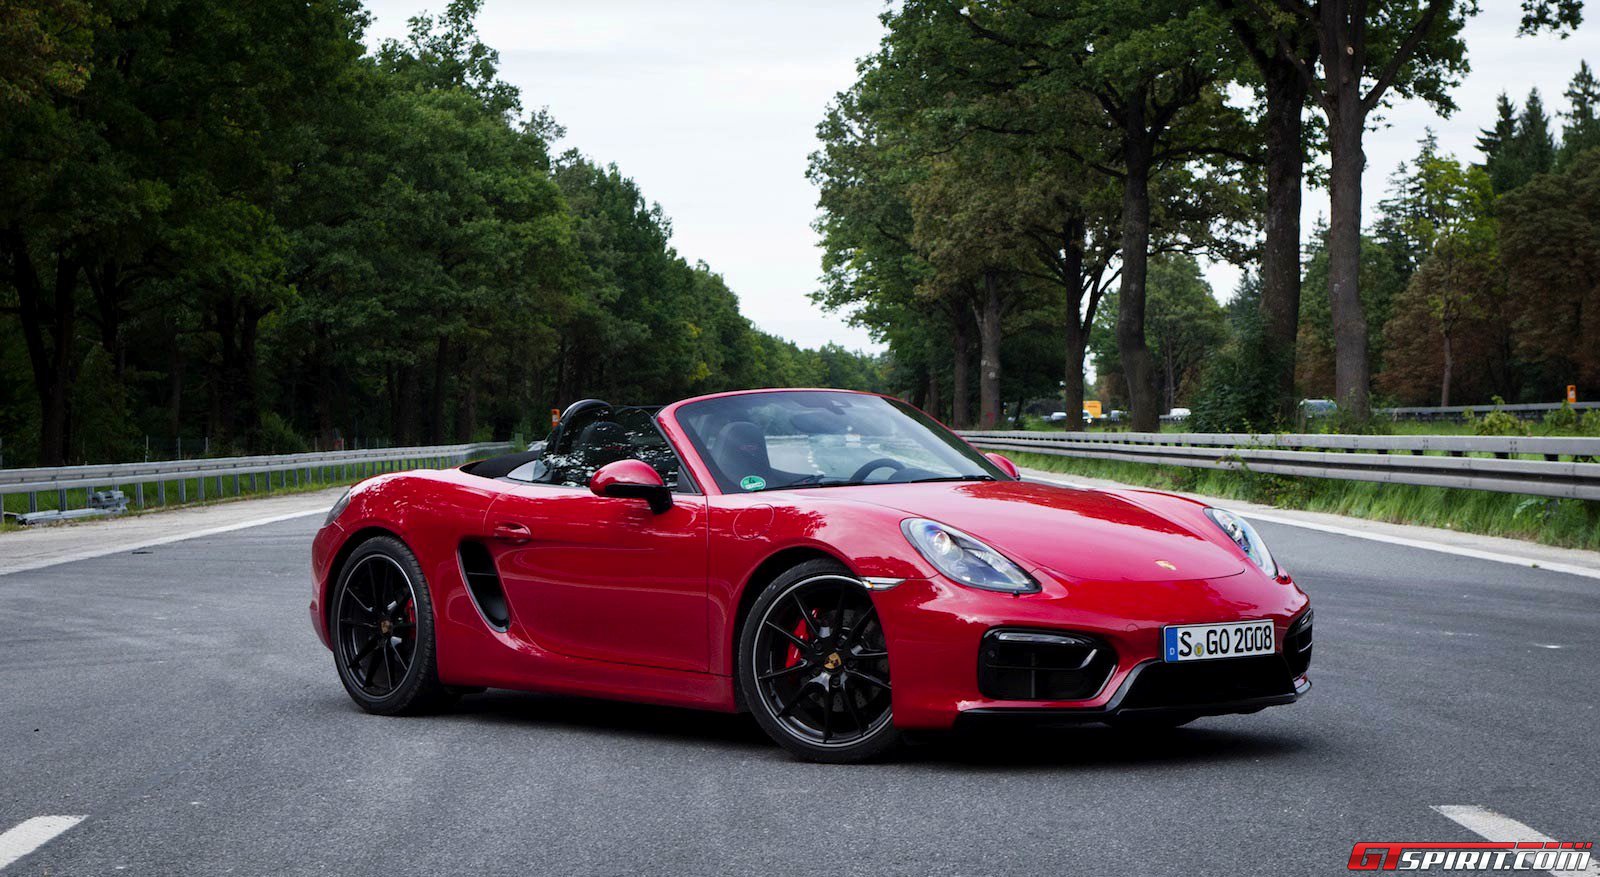 HQ 2015 Porsche Boxster Gts Wallpapers | File 305.42Kb